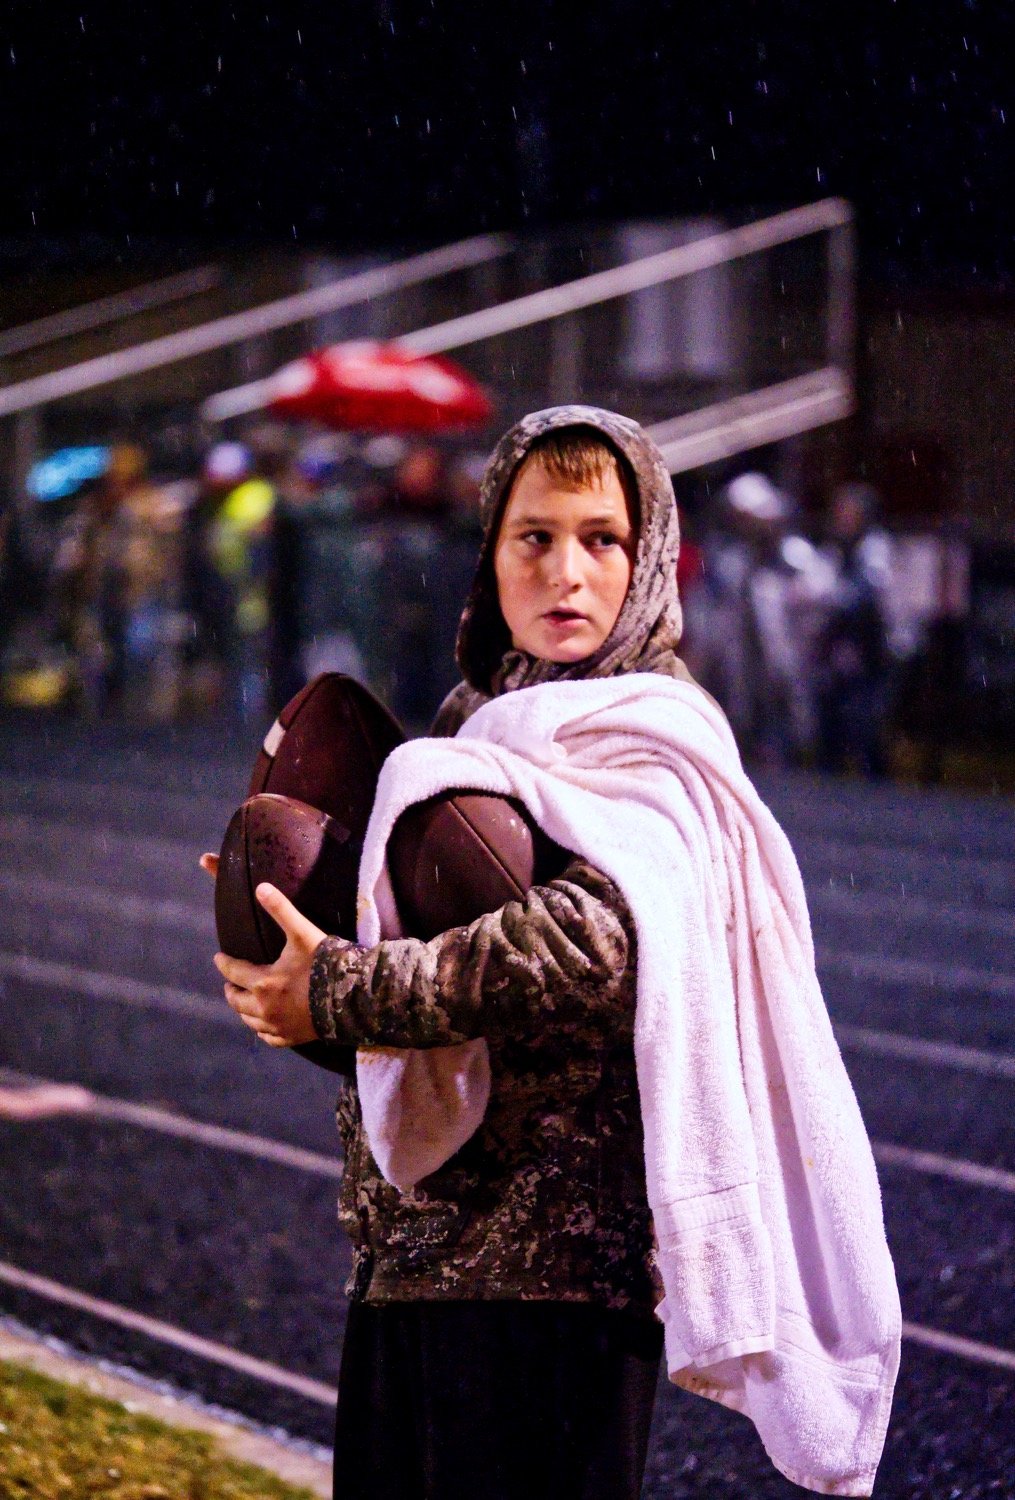 The role of ball boy was essential as ever Friday night, with the important responsibility of keeping a dry ball ready for the next Panther offensive play. [find more football photos]